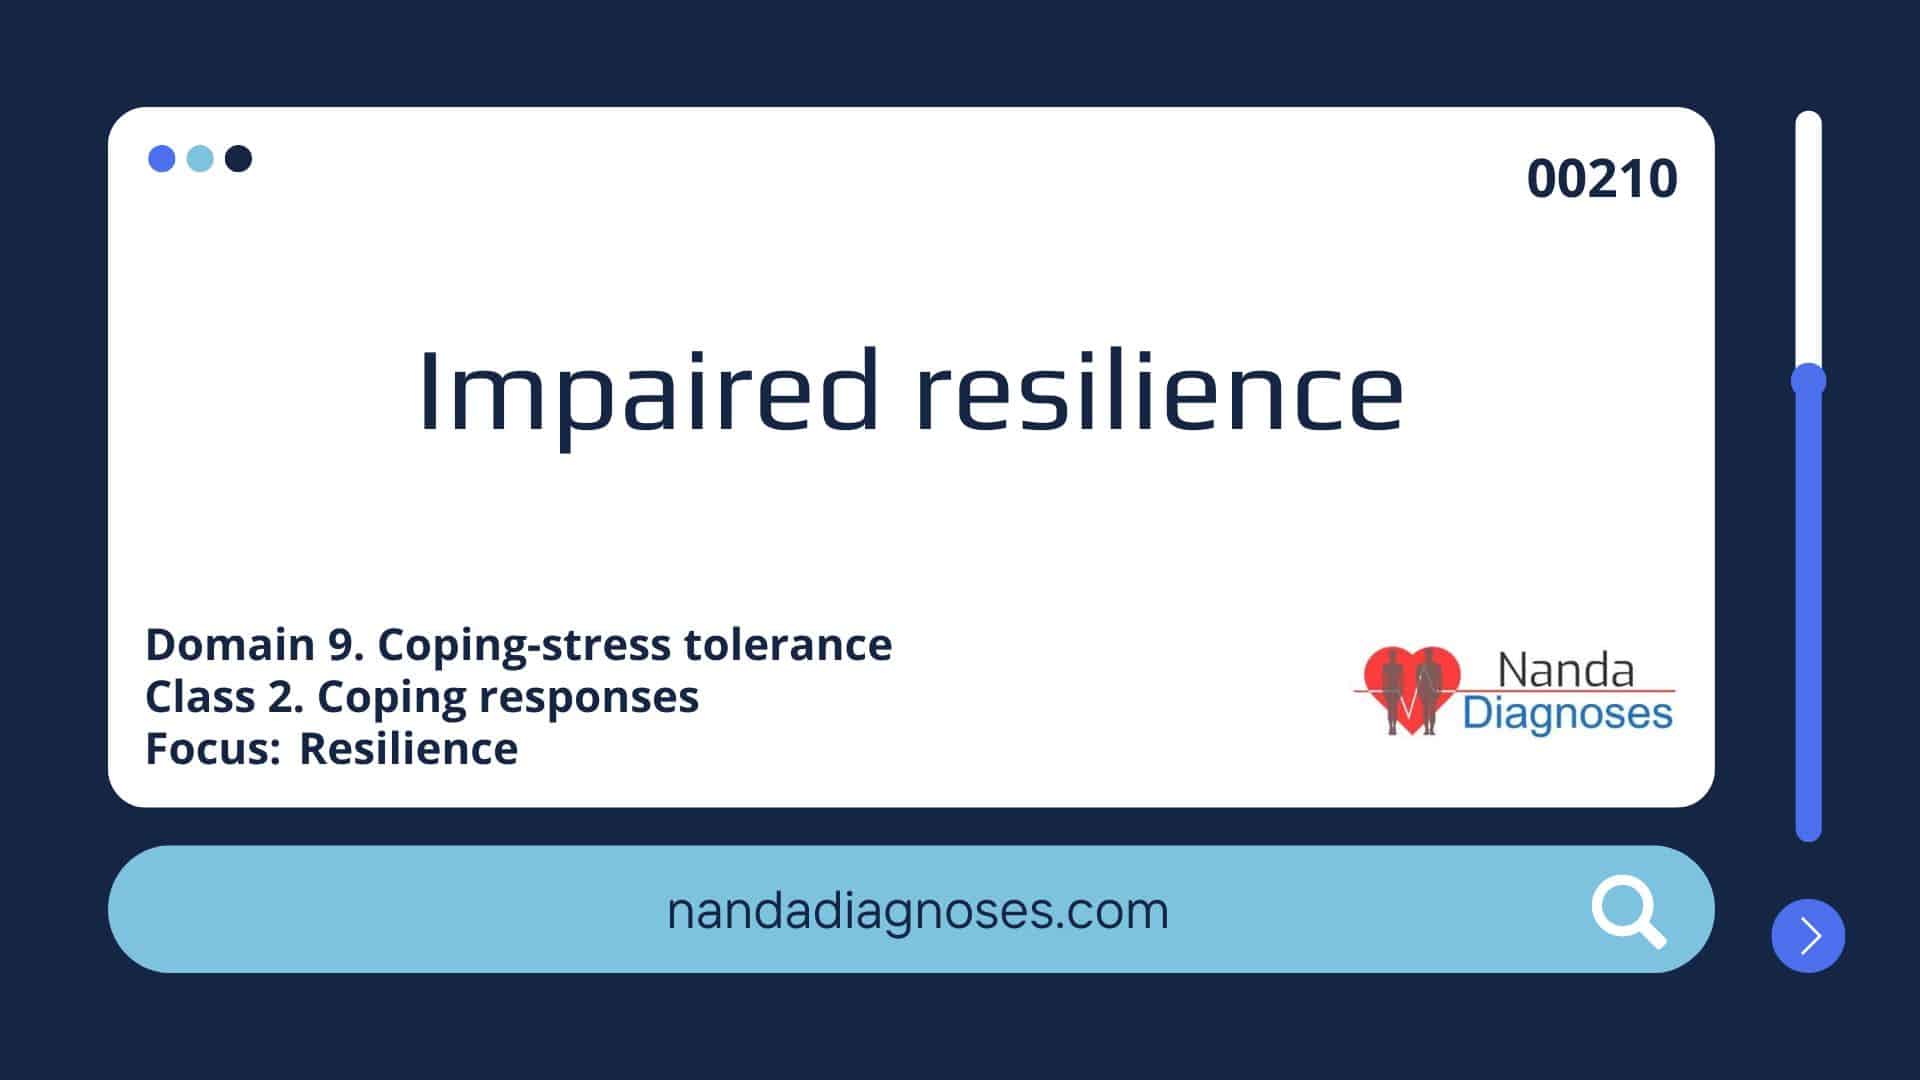 Nursing diagnosis Impaired resilience